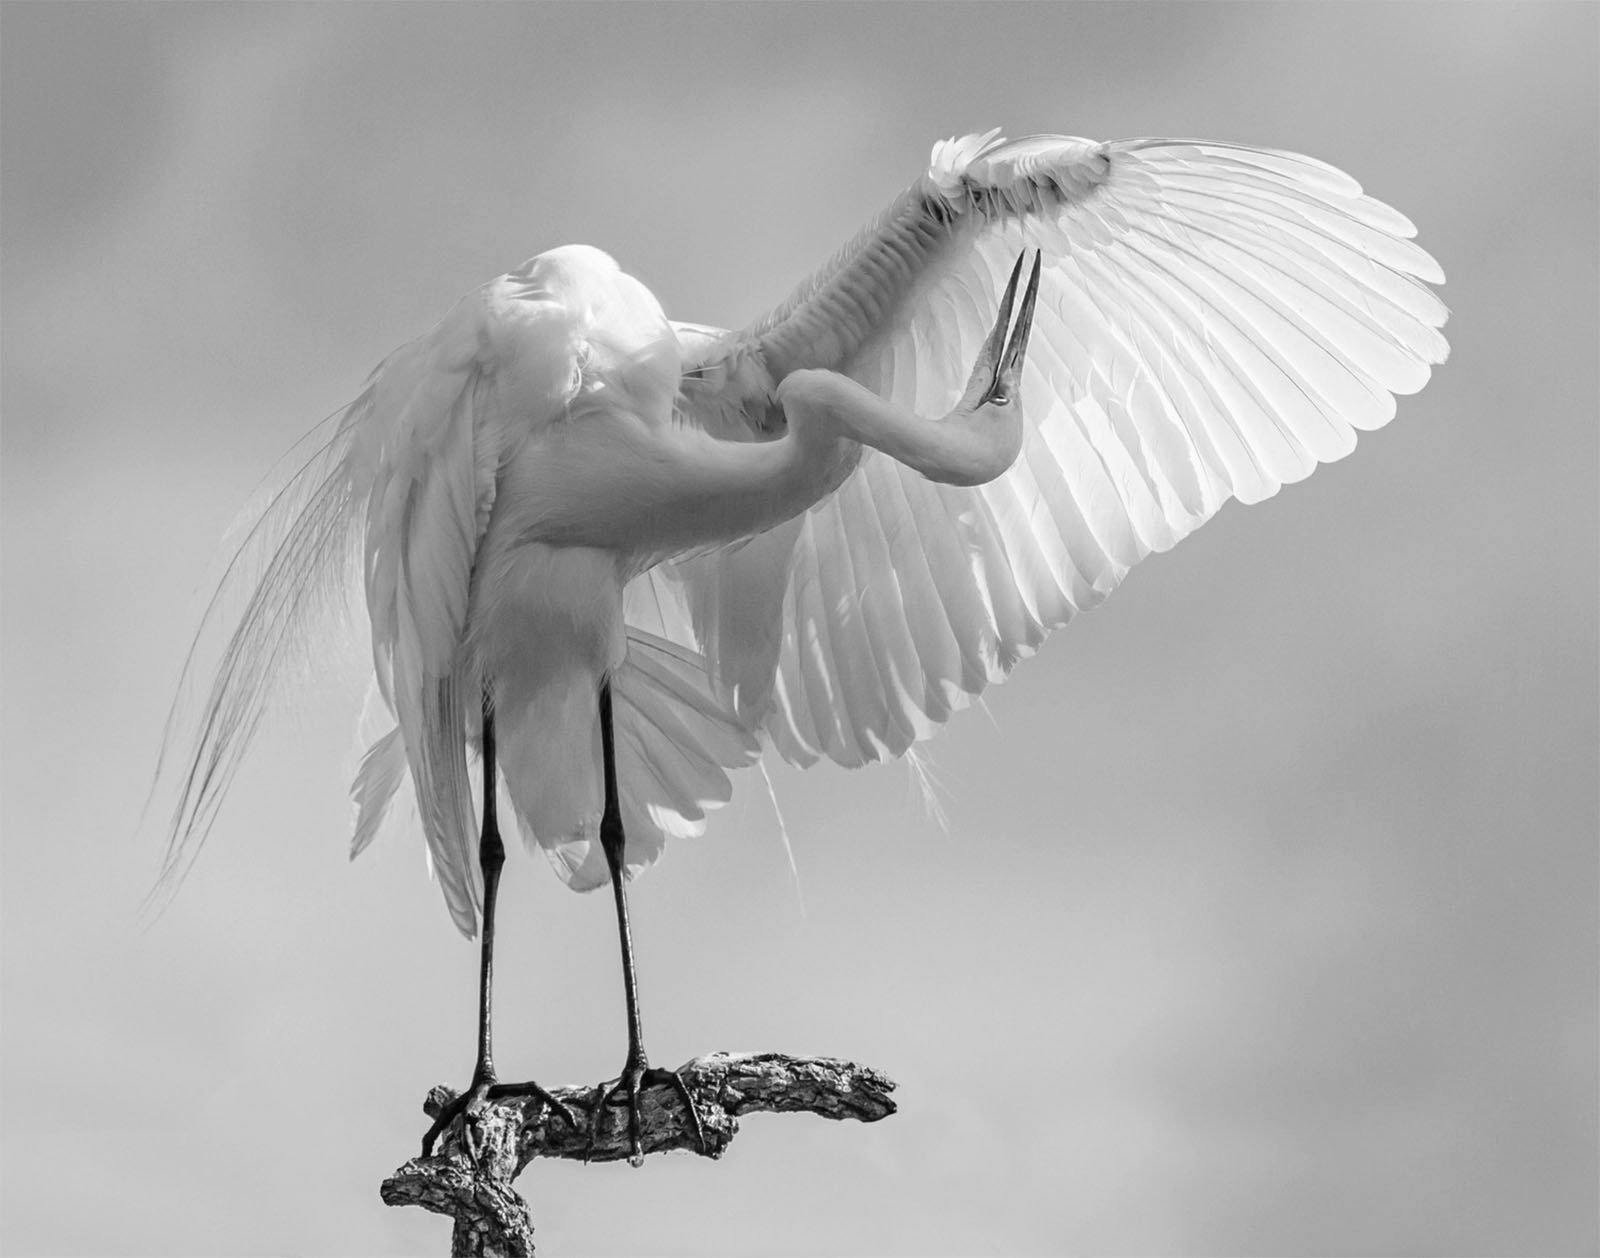 A black and white photograph of an egret perched on a branch against a cloudy sky. The bird has its wings partially spread and is bending its long neck to preen its feathers.